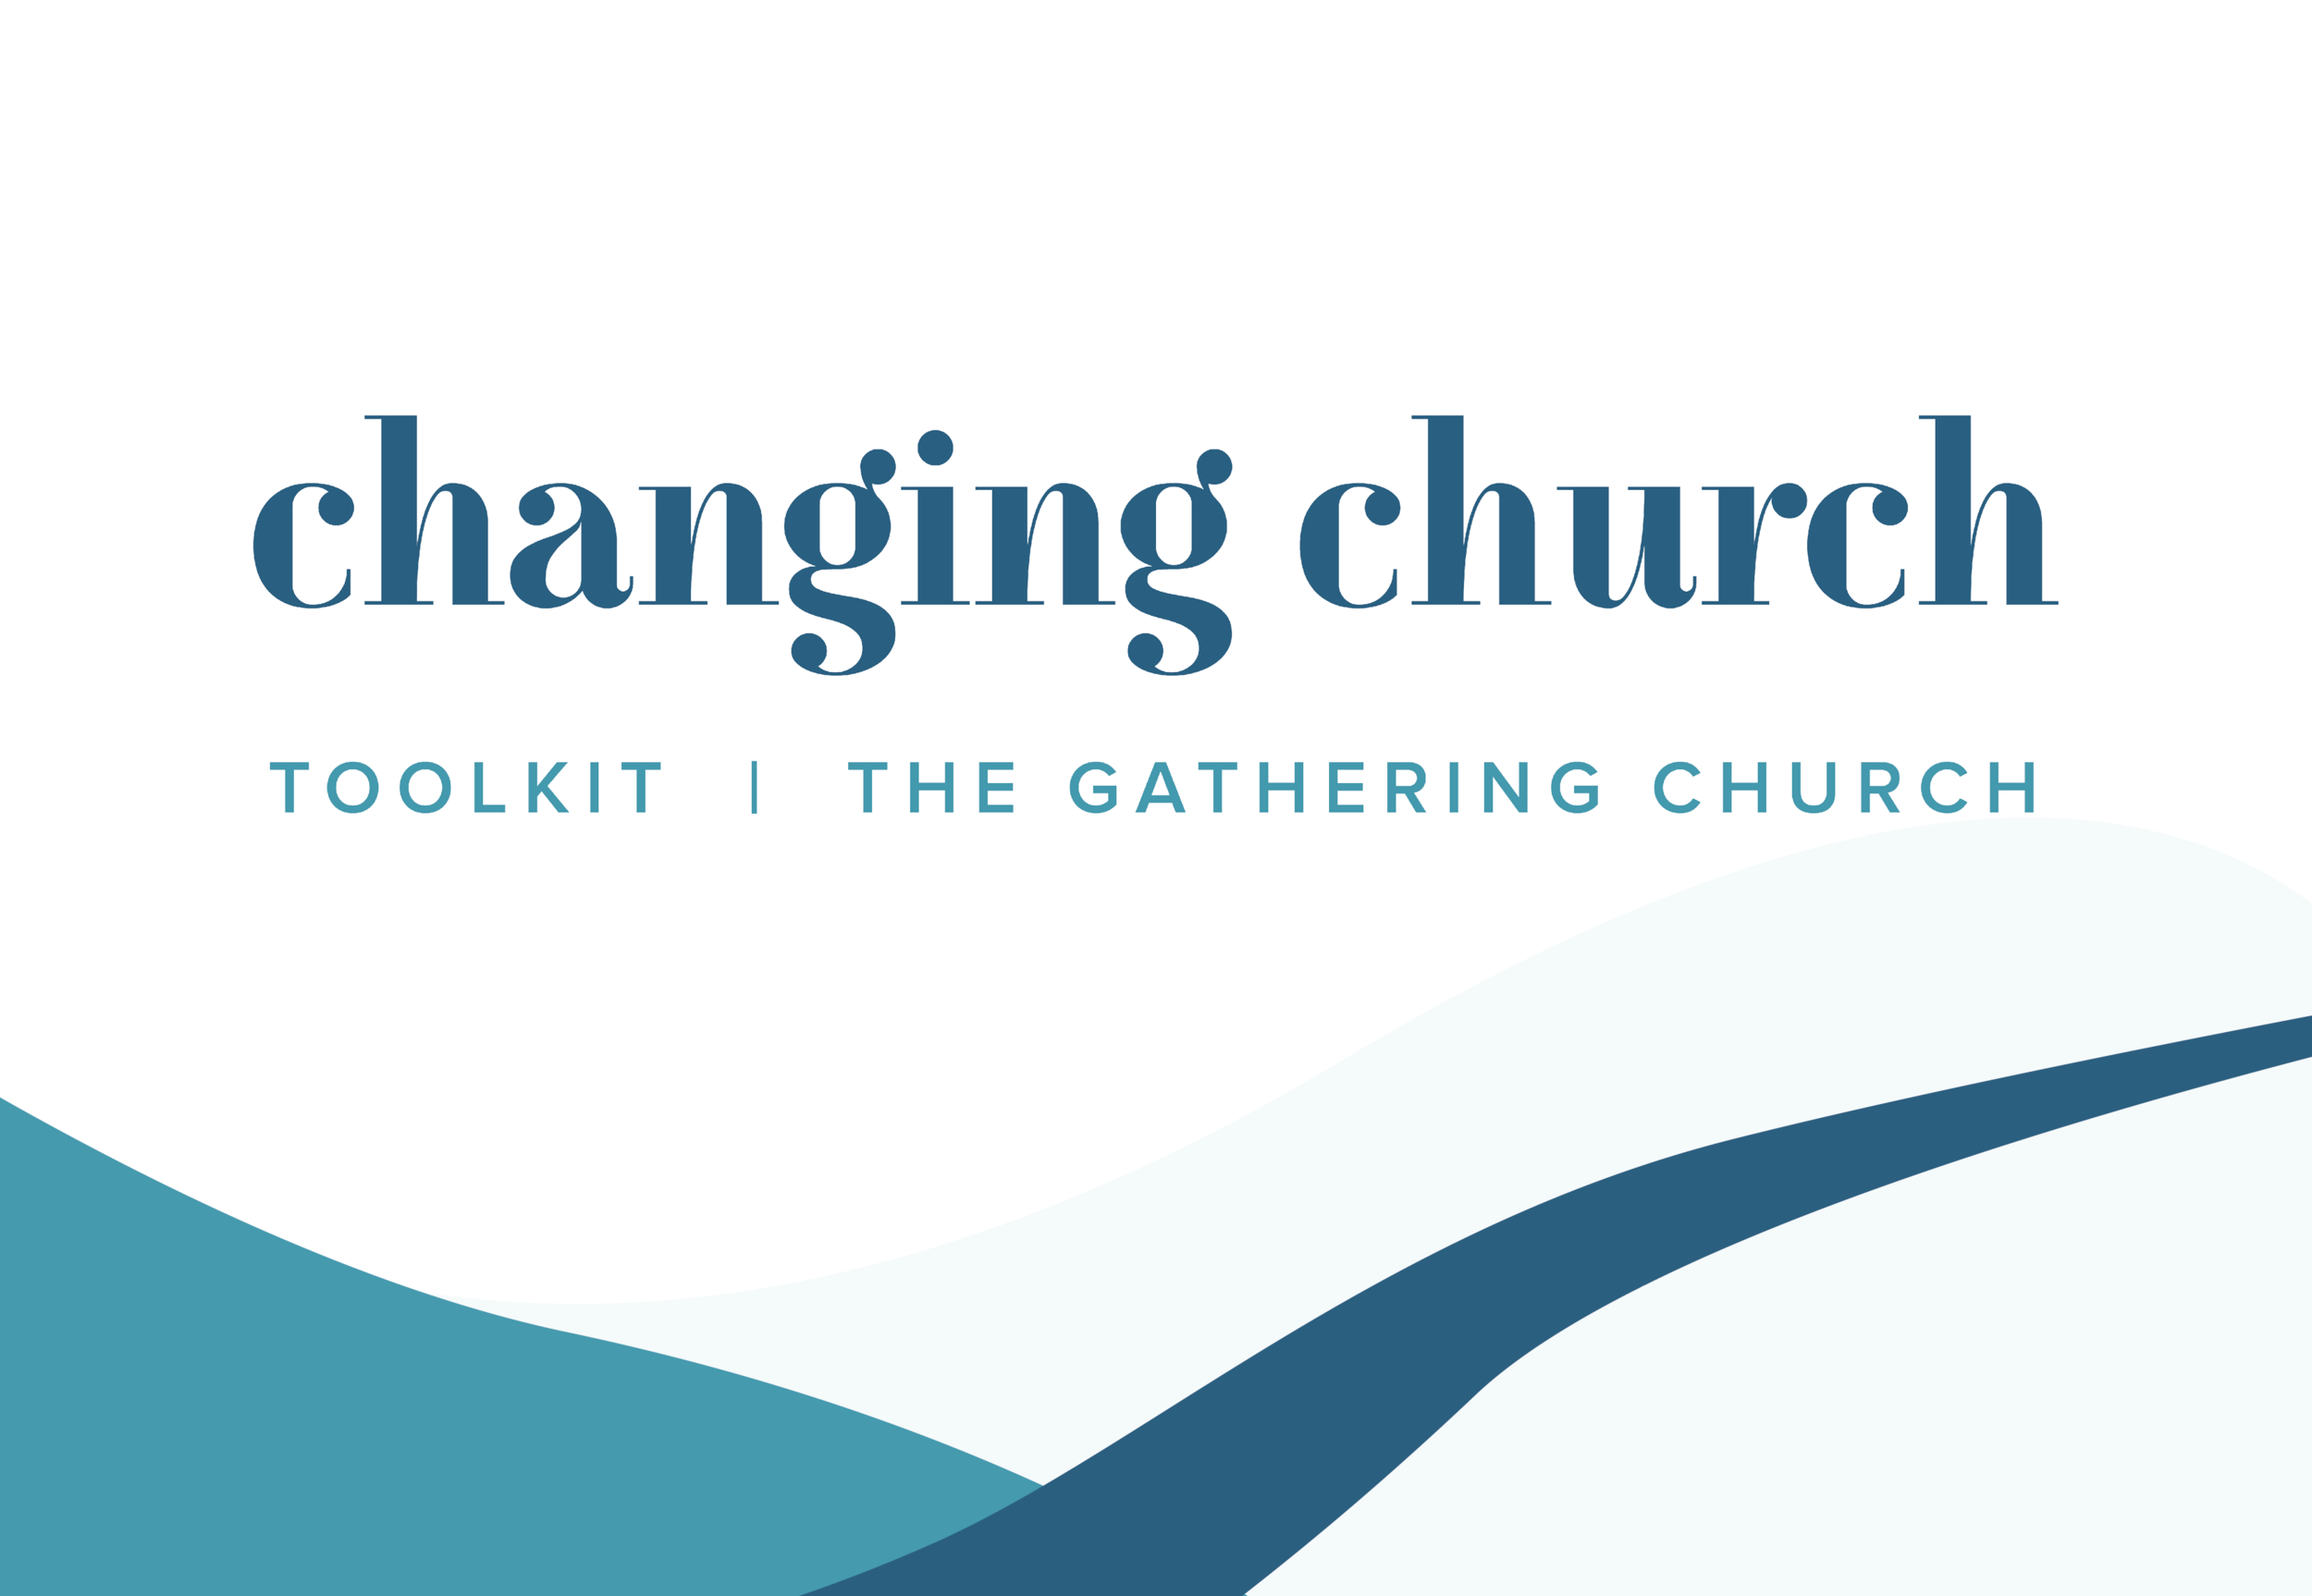 Changing Church - An evolving resource designed to help you navigate the challenges and opportunities facing the church as we move forward from lockdown